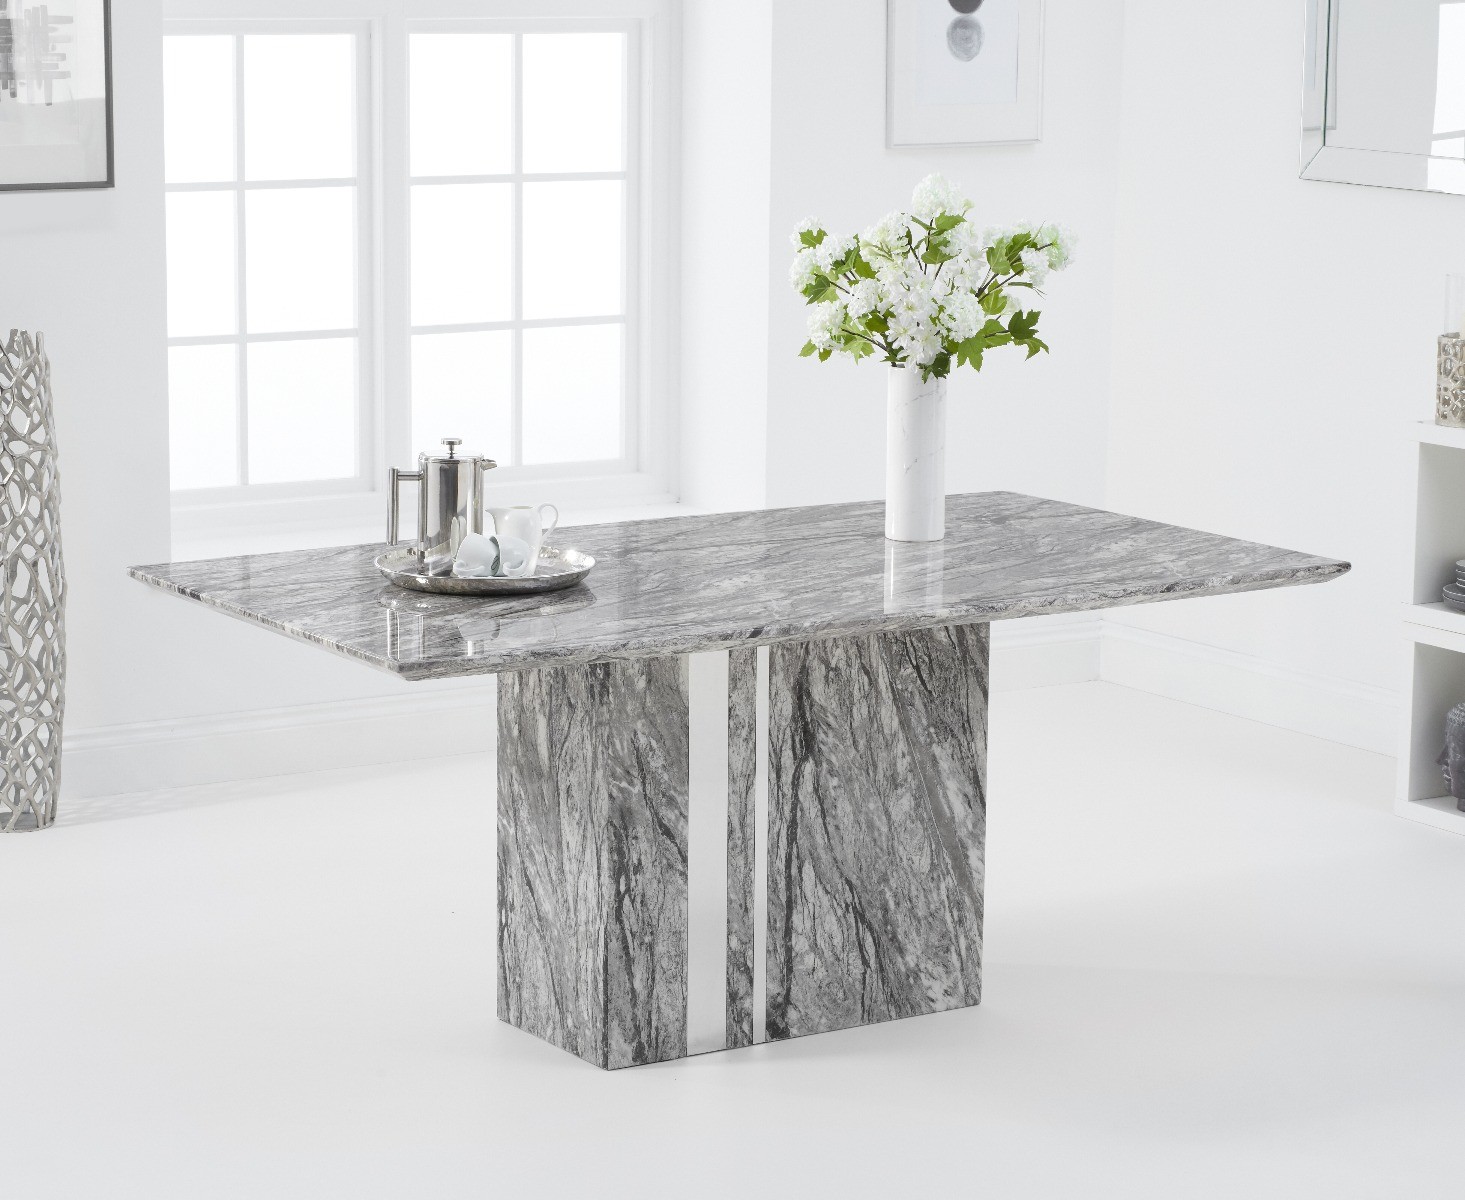 Photo 2 of Alicia 180cm grey marble dining table with 4 grey aldo chairs